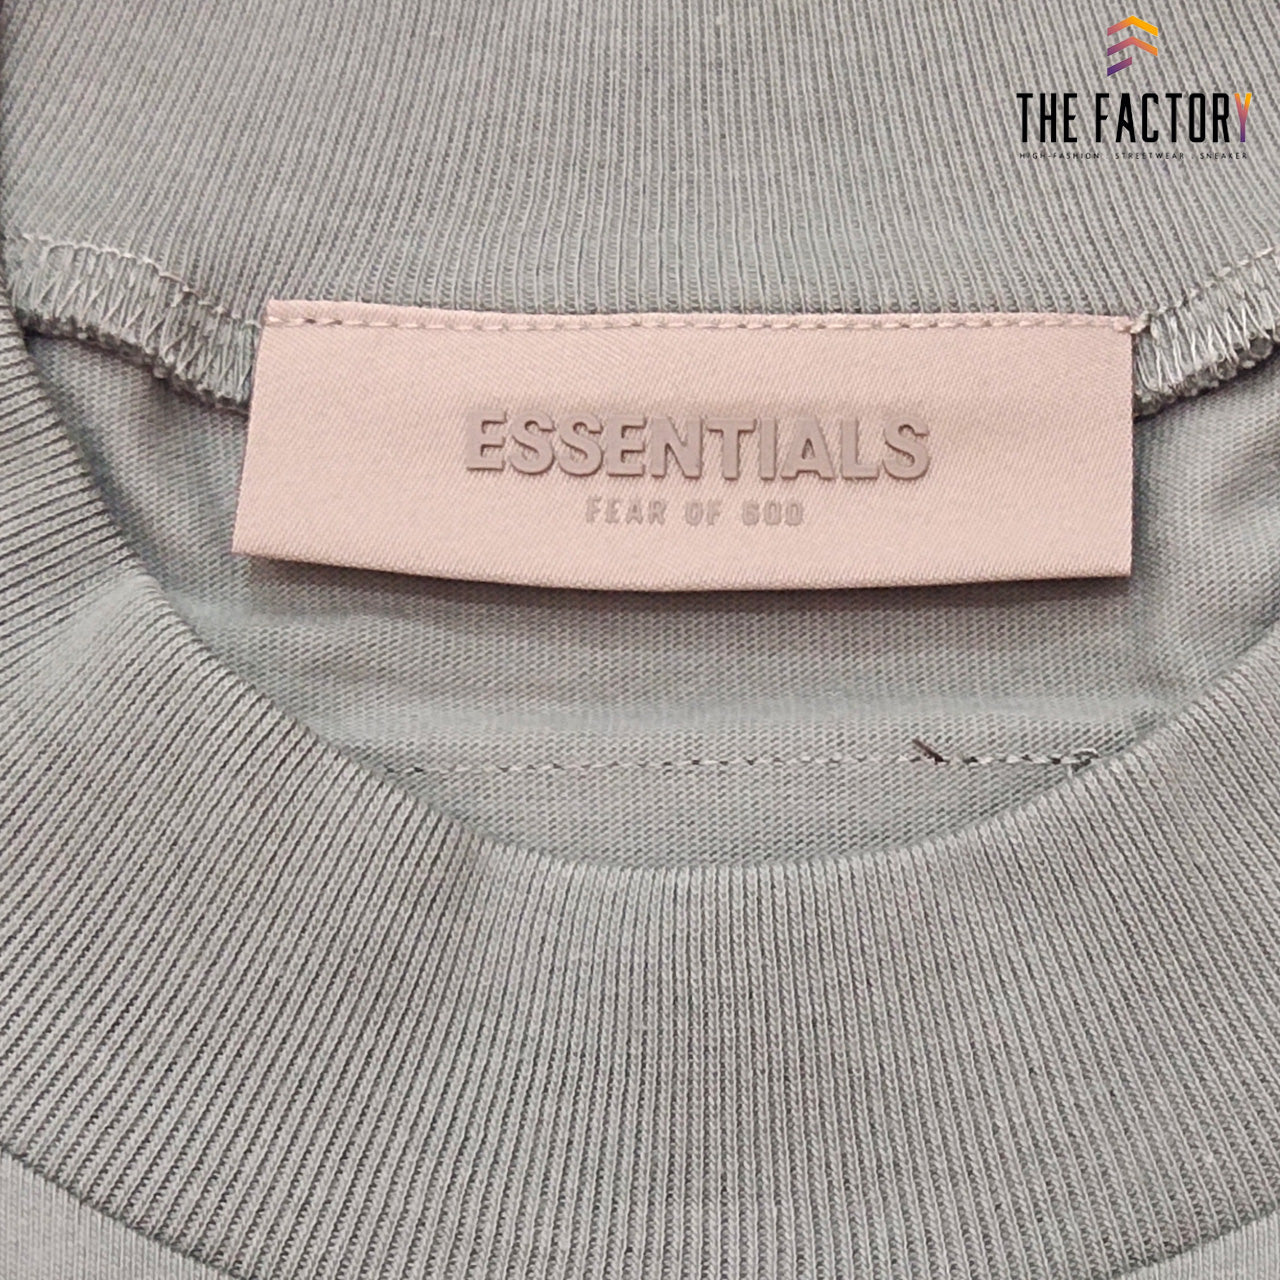 Fear of God - Essentials T-Shirt SS23 (Sycamore)